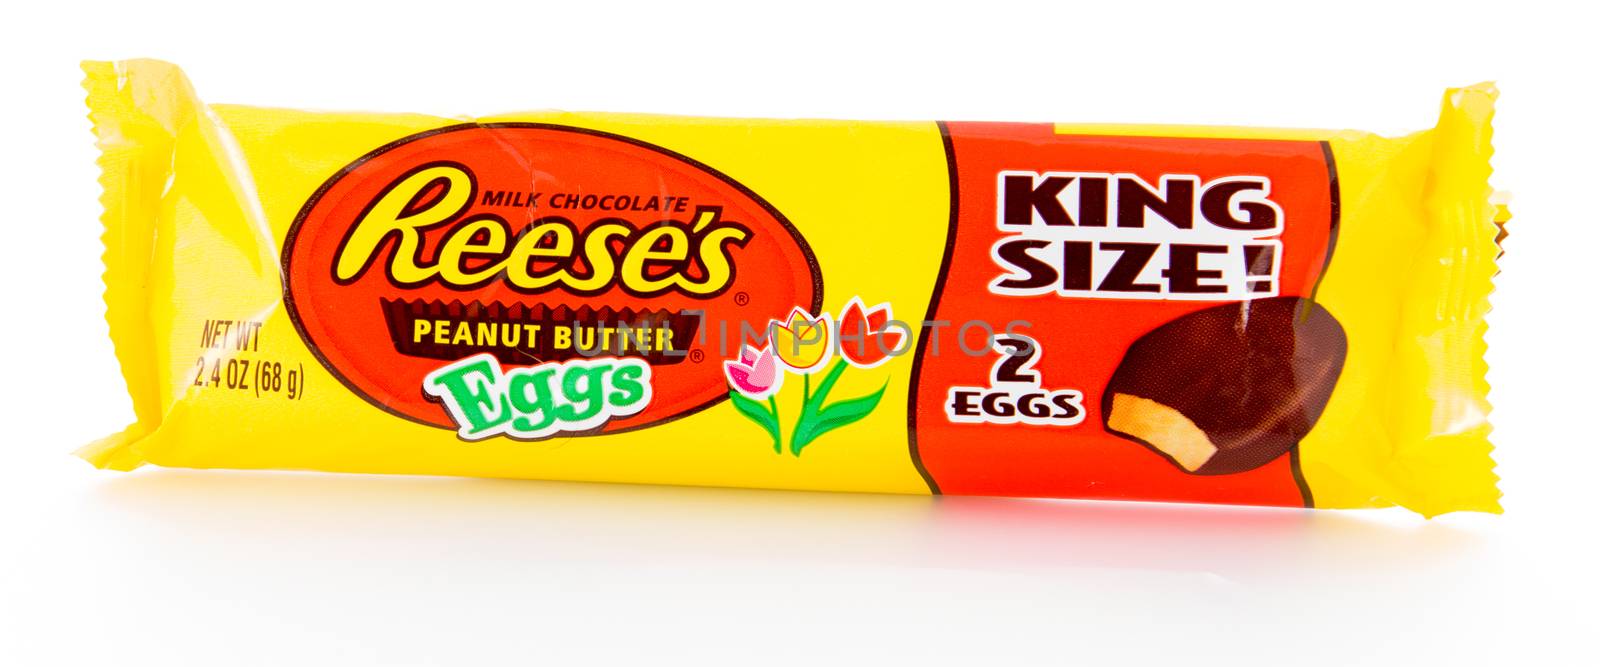 Winneconne, WI - 21 February 2015:  Double package of Reese's peanut butter cup shaped in form of an egg.